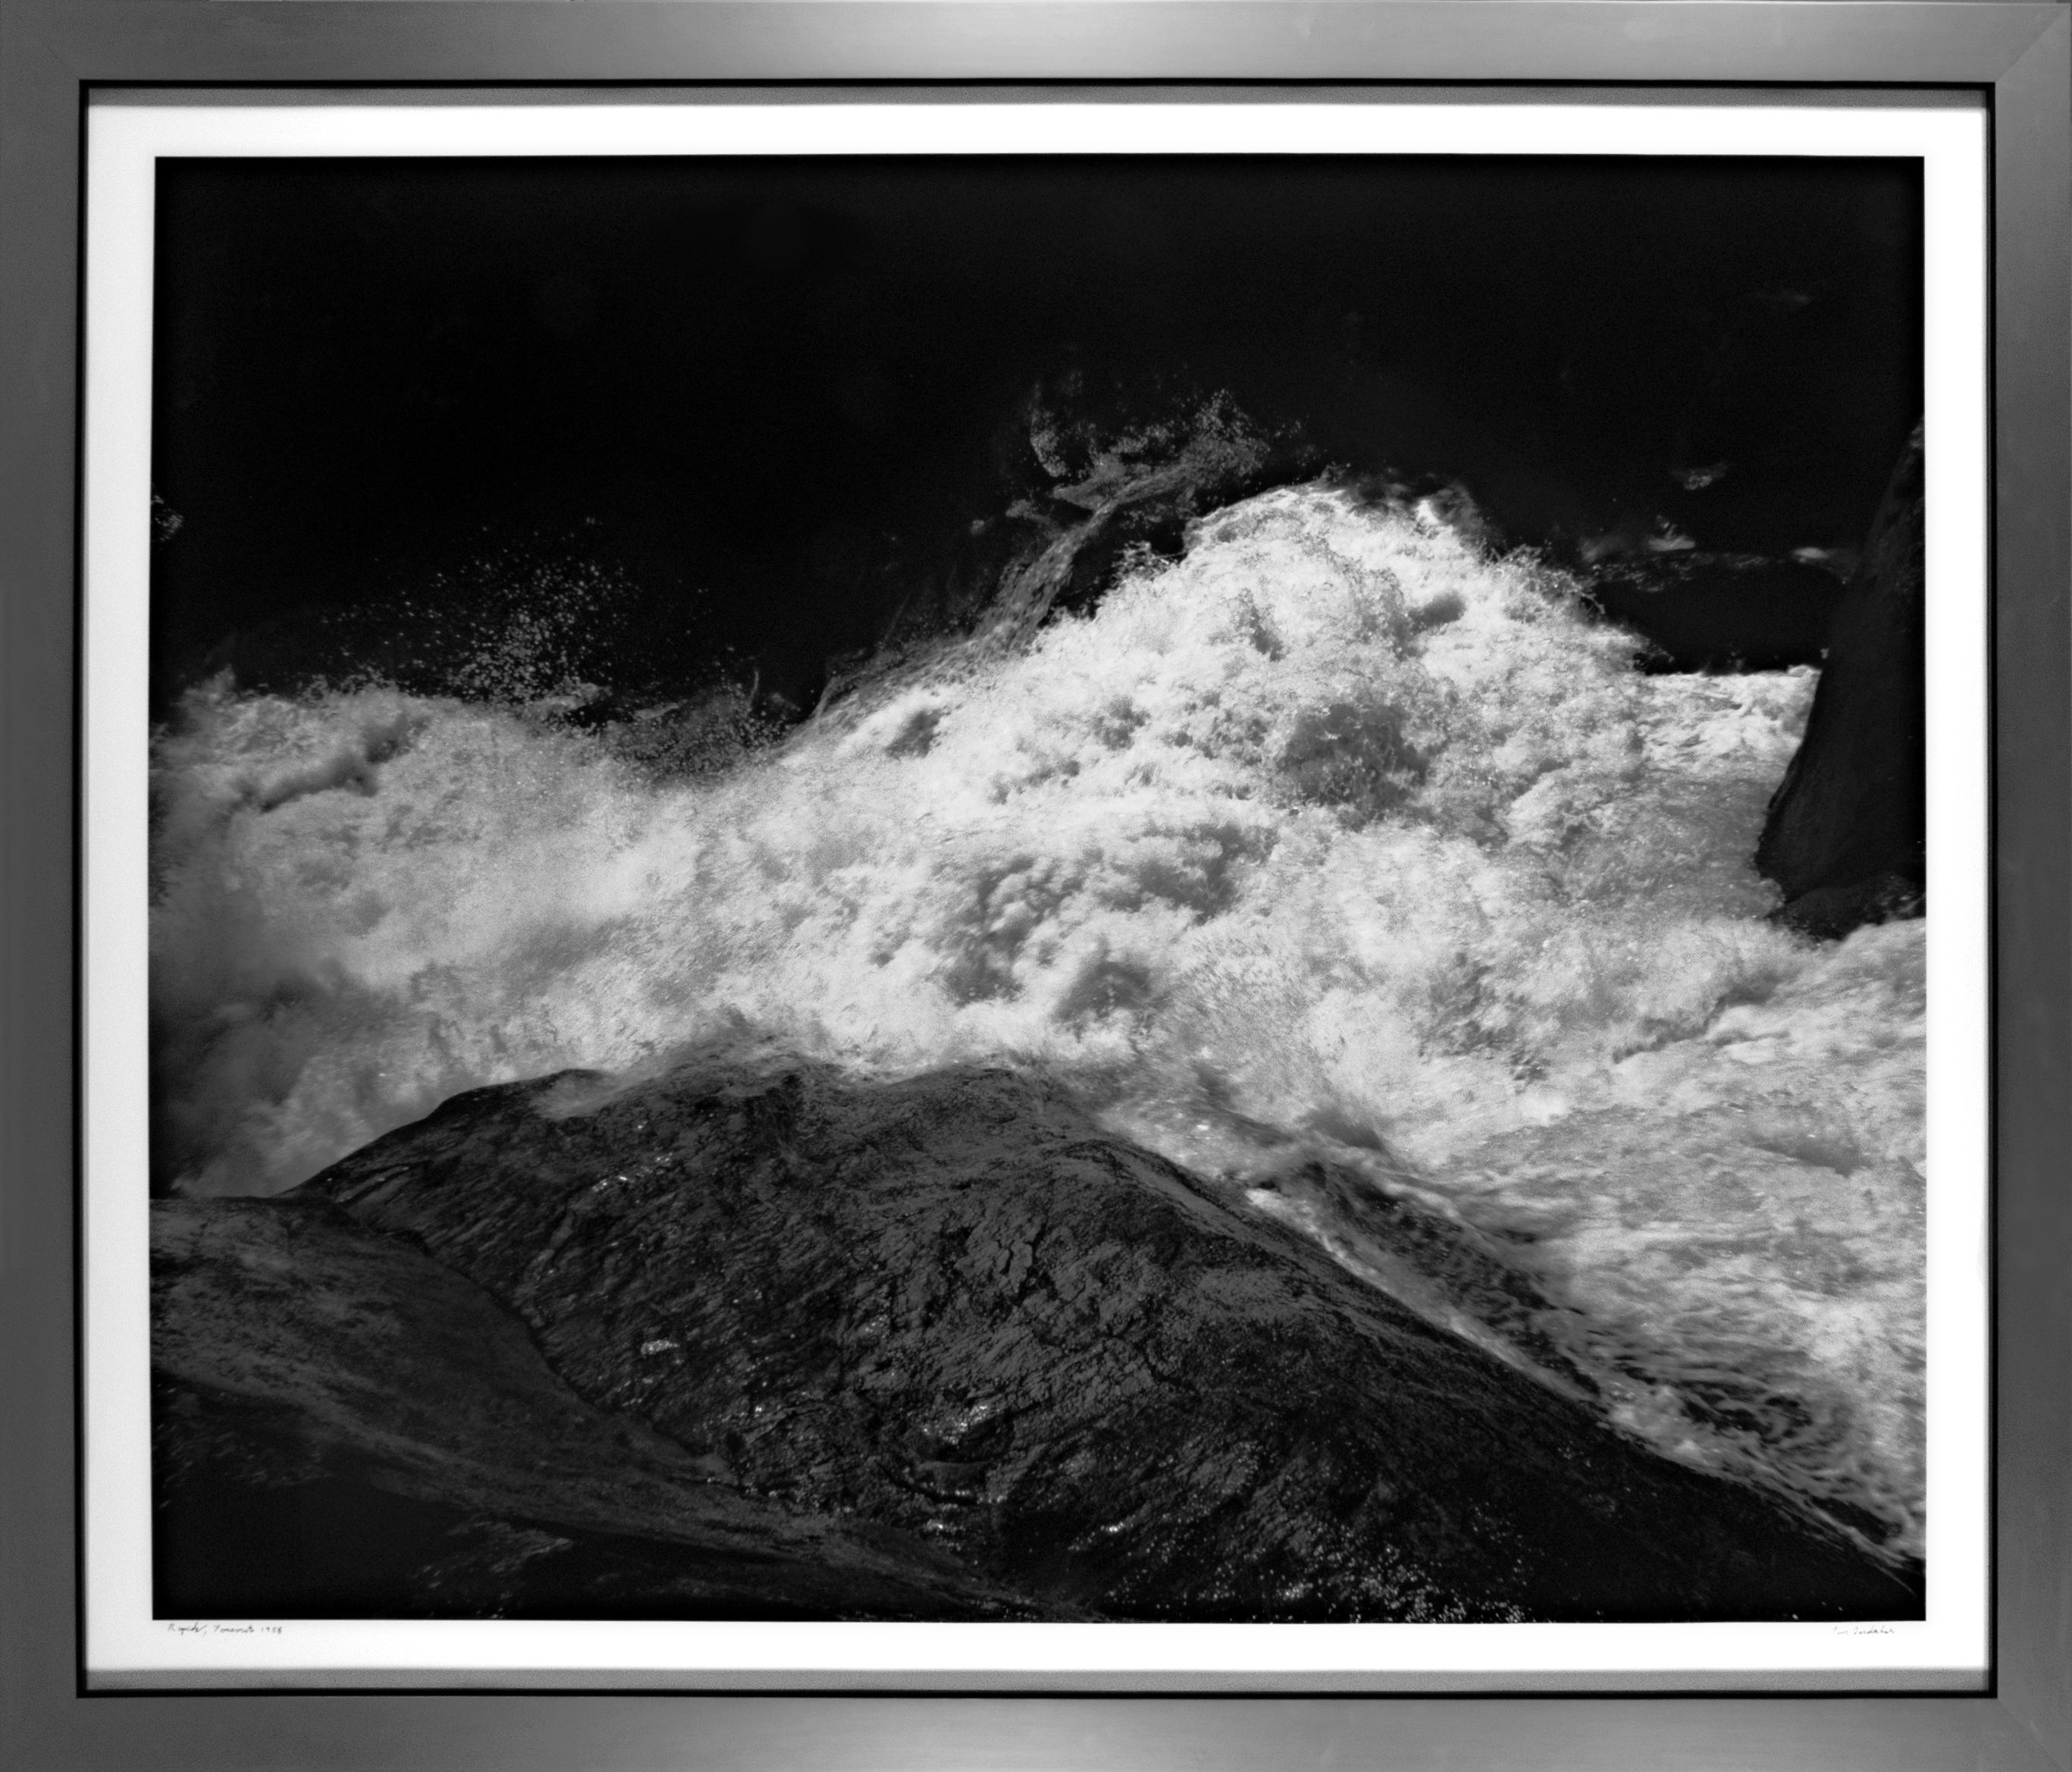 Thomas Ferderbar Black and White Photograph - Nature Photography Achromatic Black and White Landscape Water Rapids Cali Signed